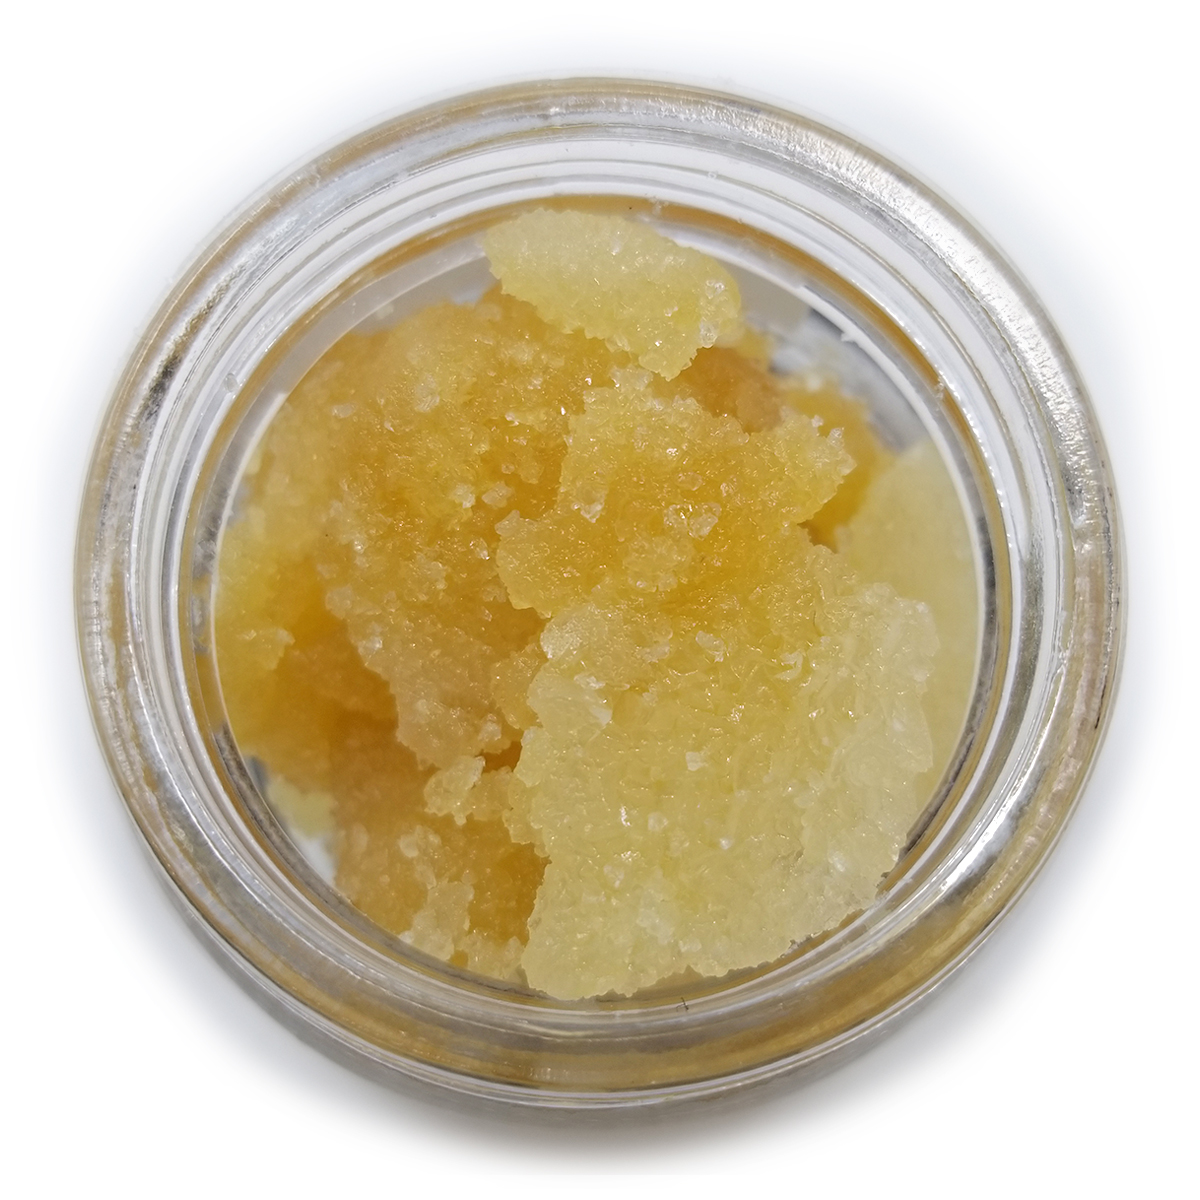 Pinks Live Resin Buy Concentrates Online | Mail Order Marijuana